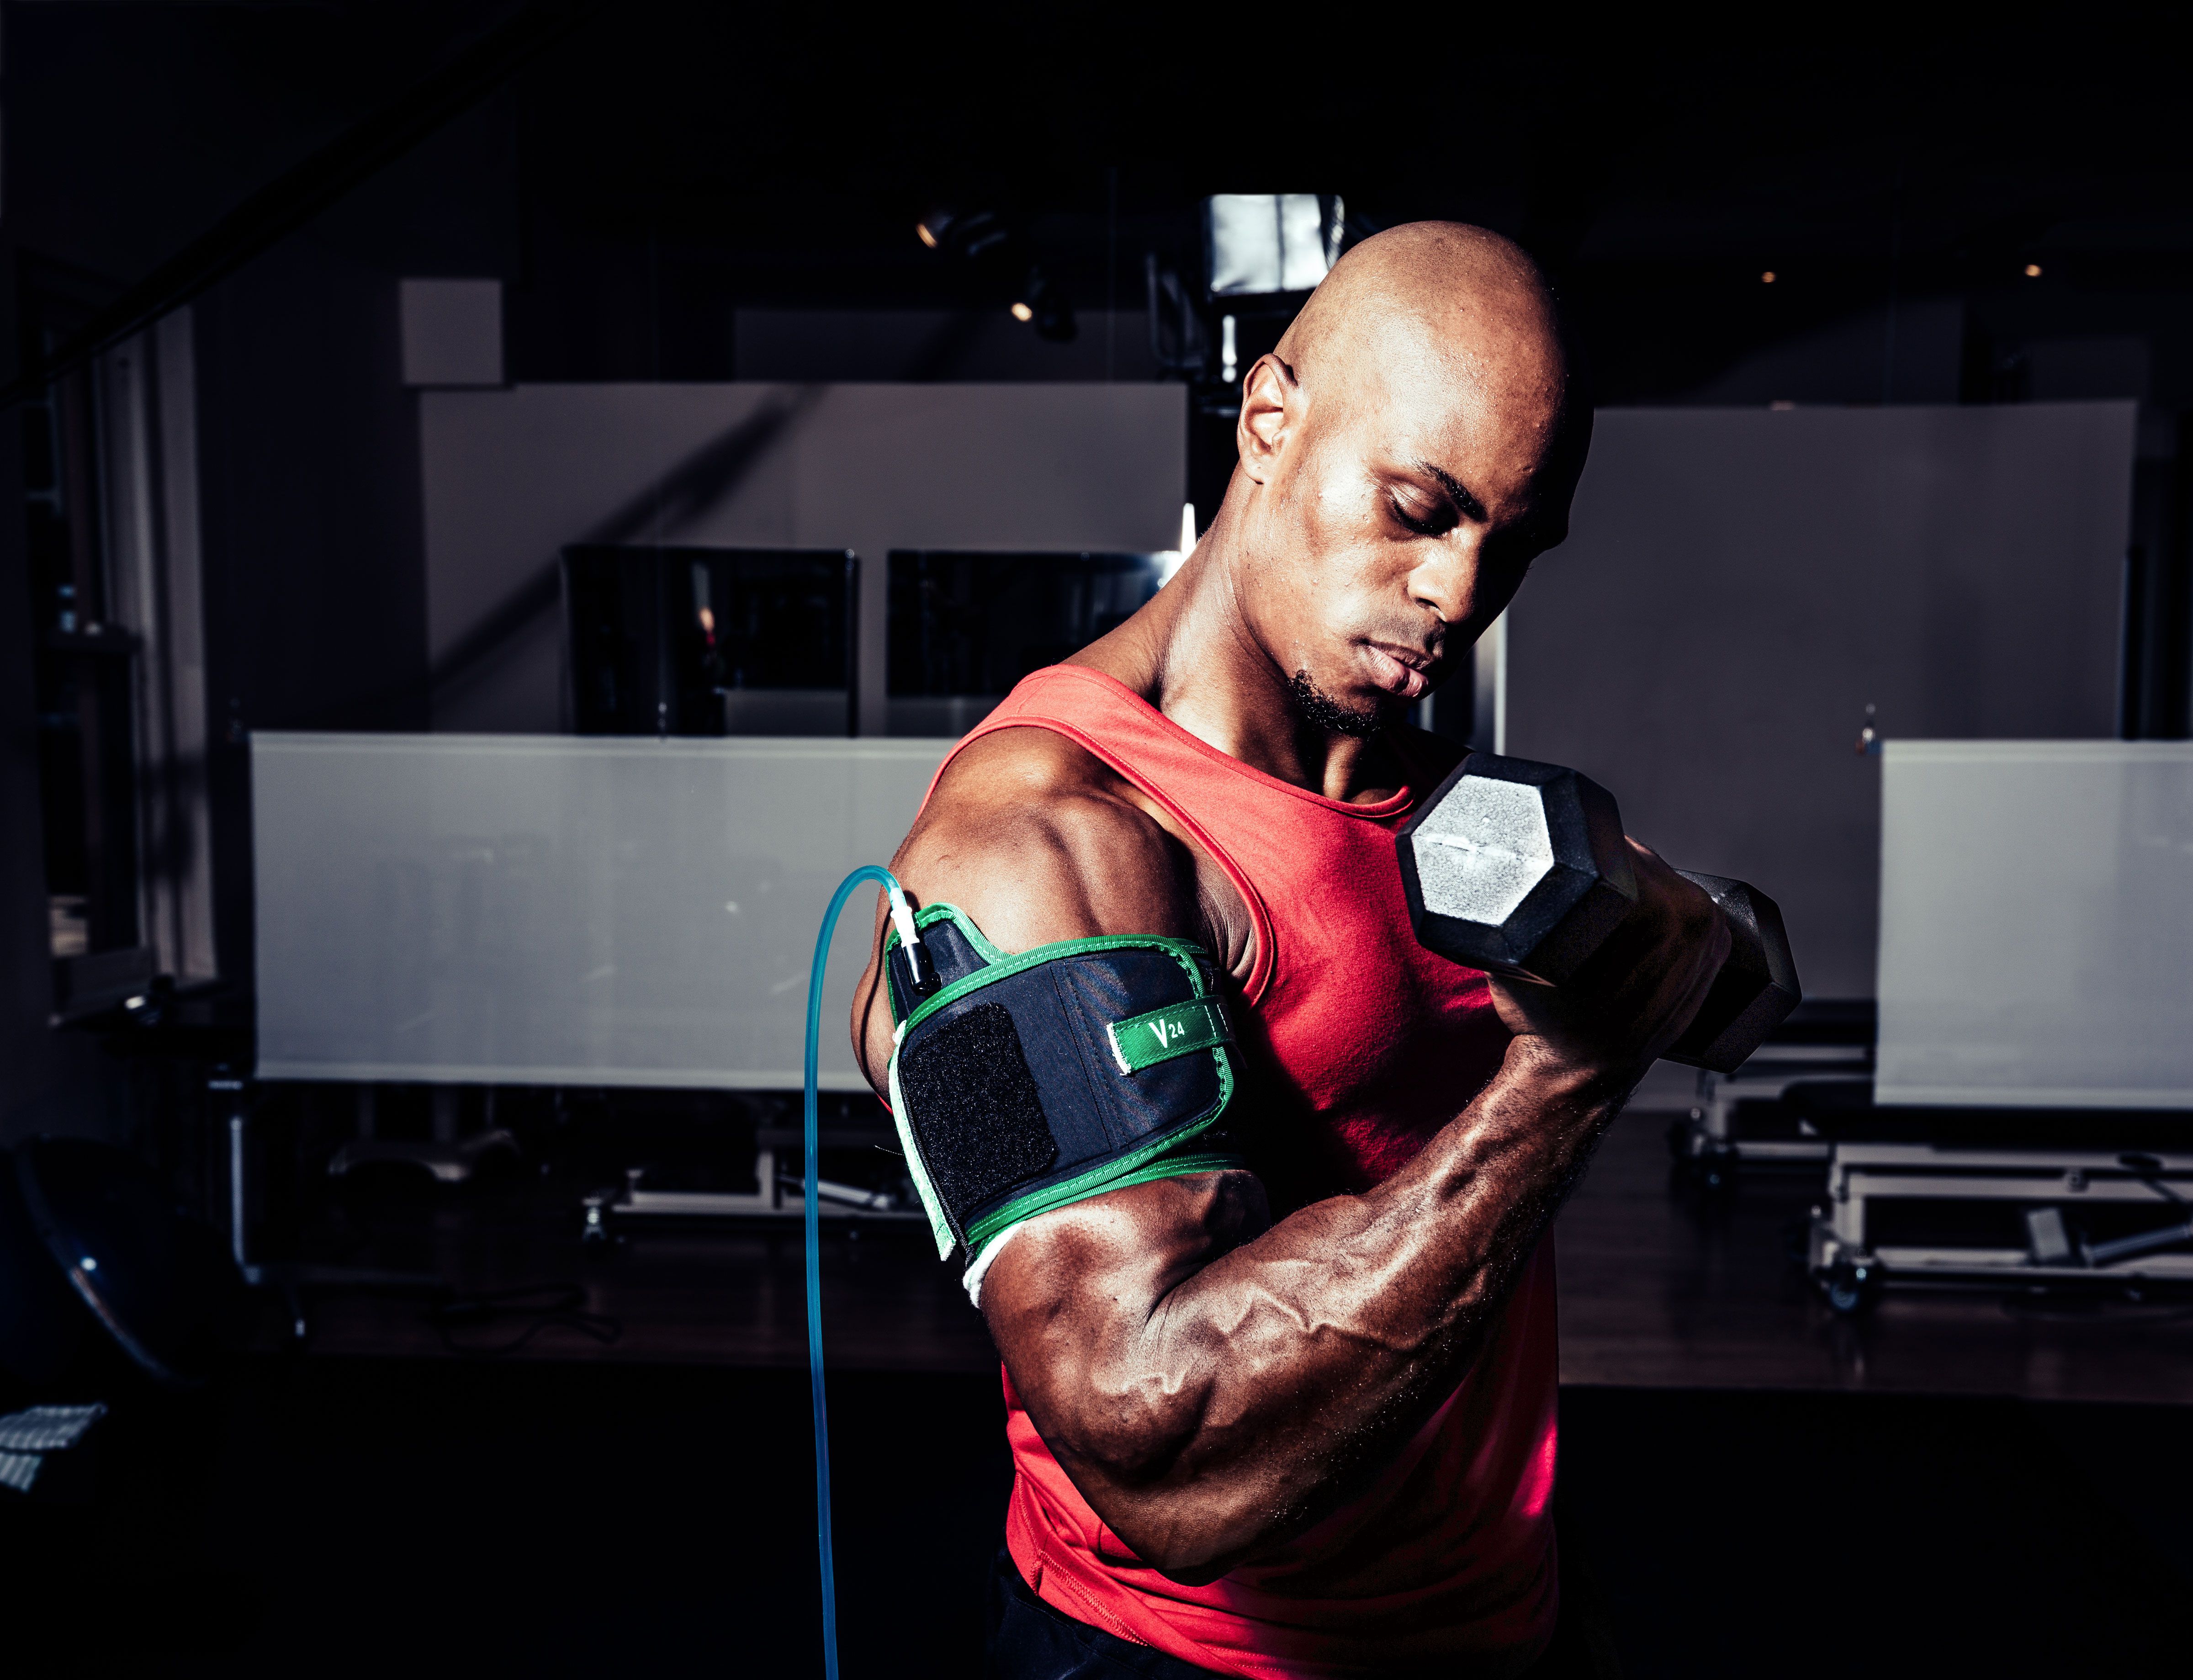 BLUE MAX-BICEP STRAP Max Bicep Blood Flow Restriction Occlusion Training 